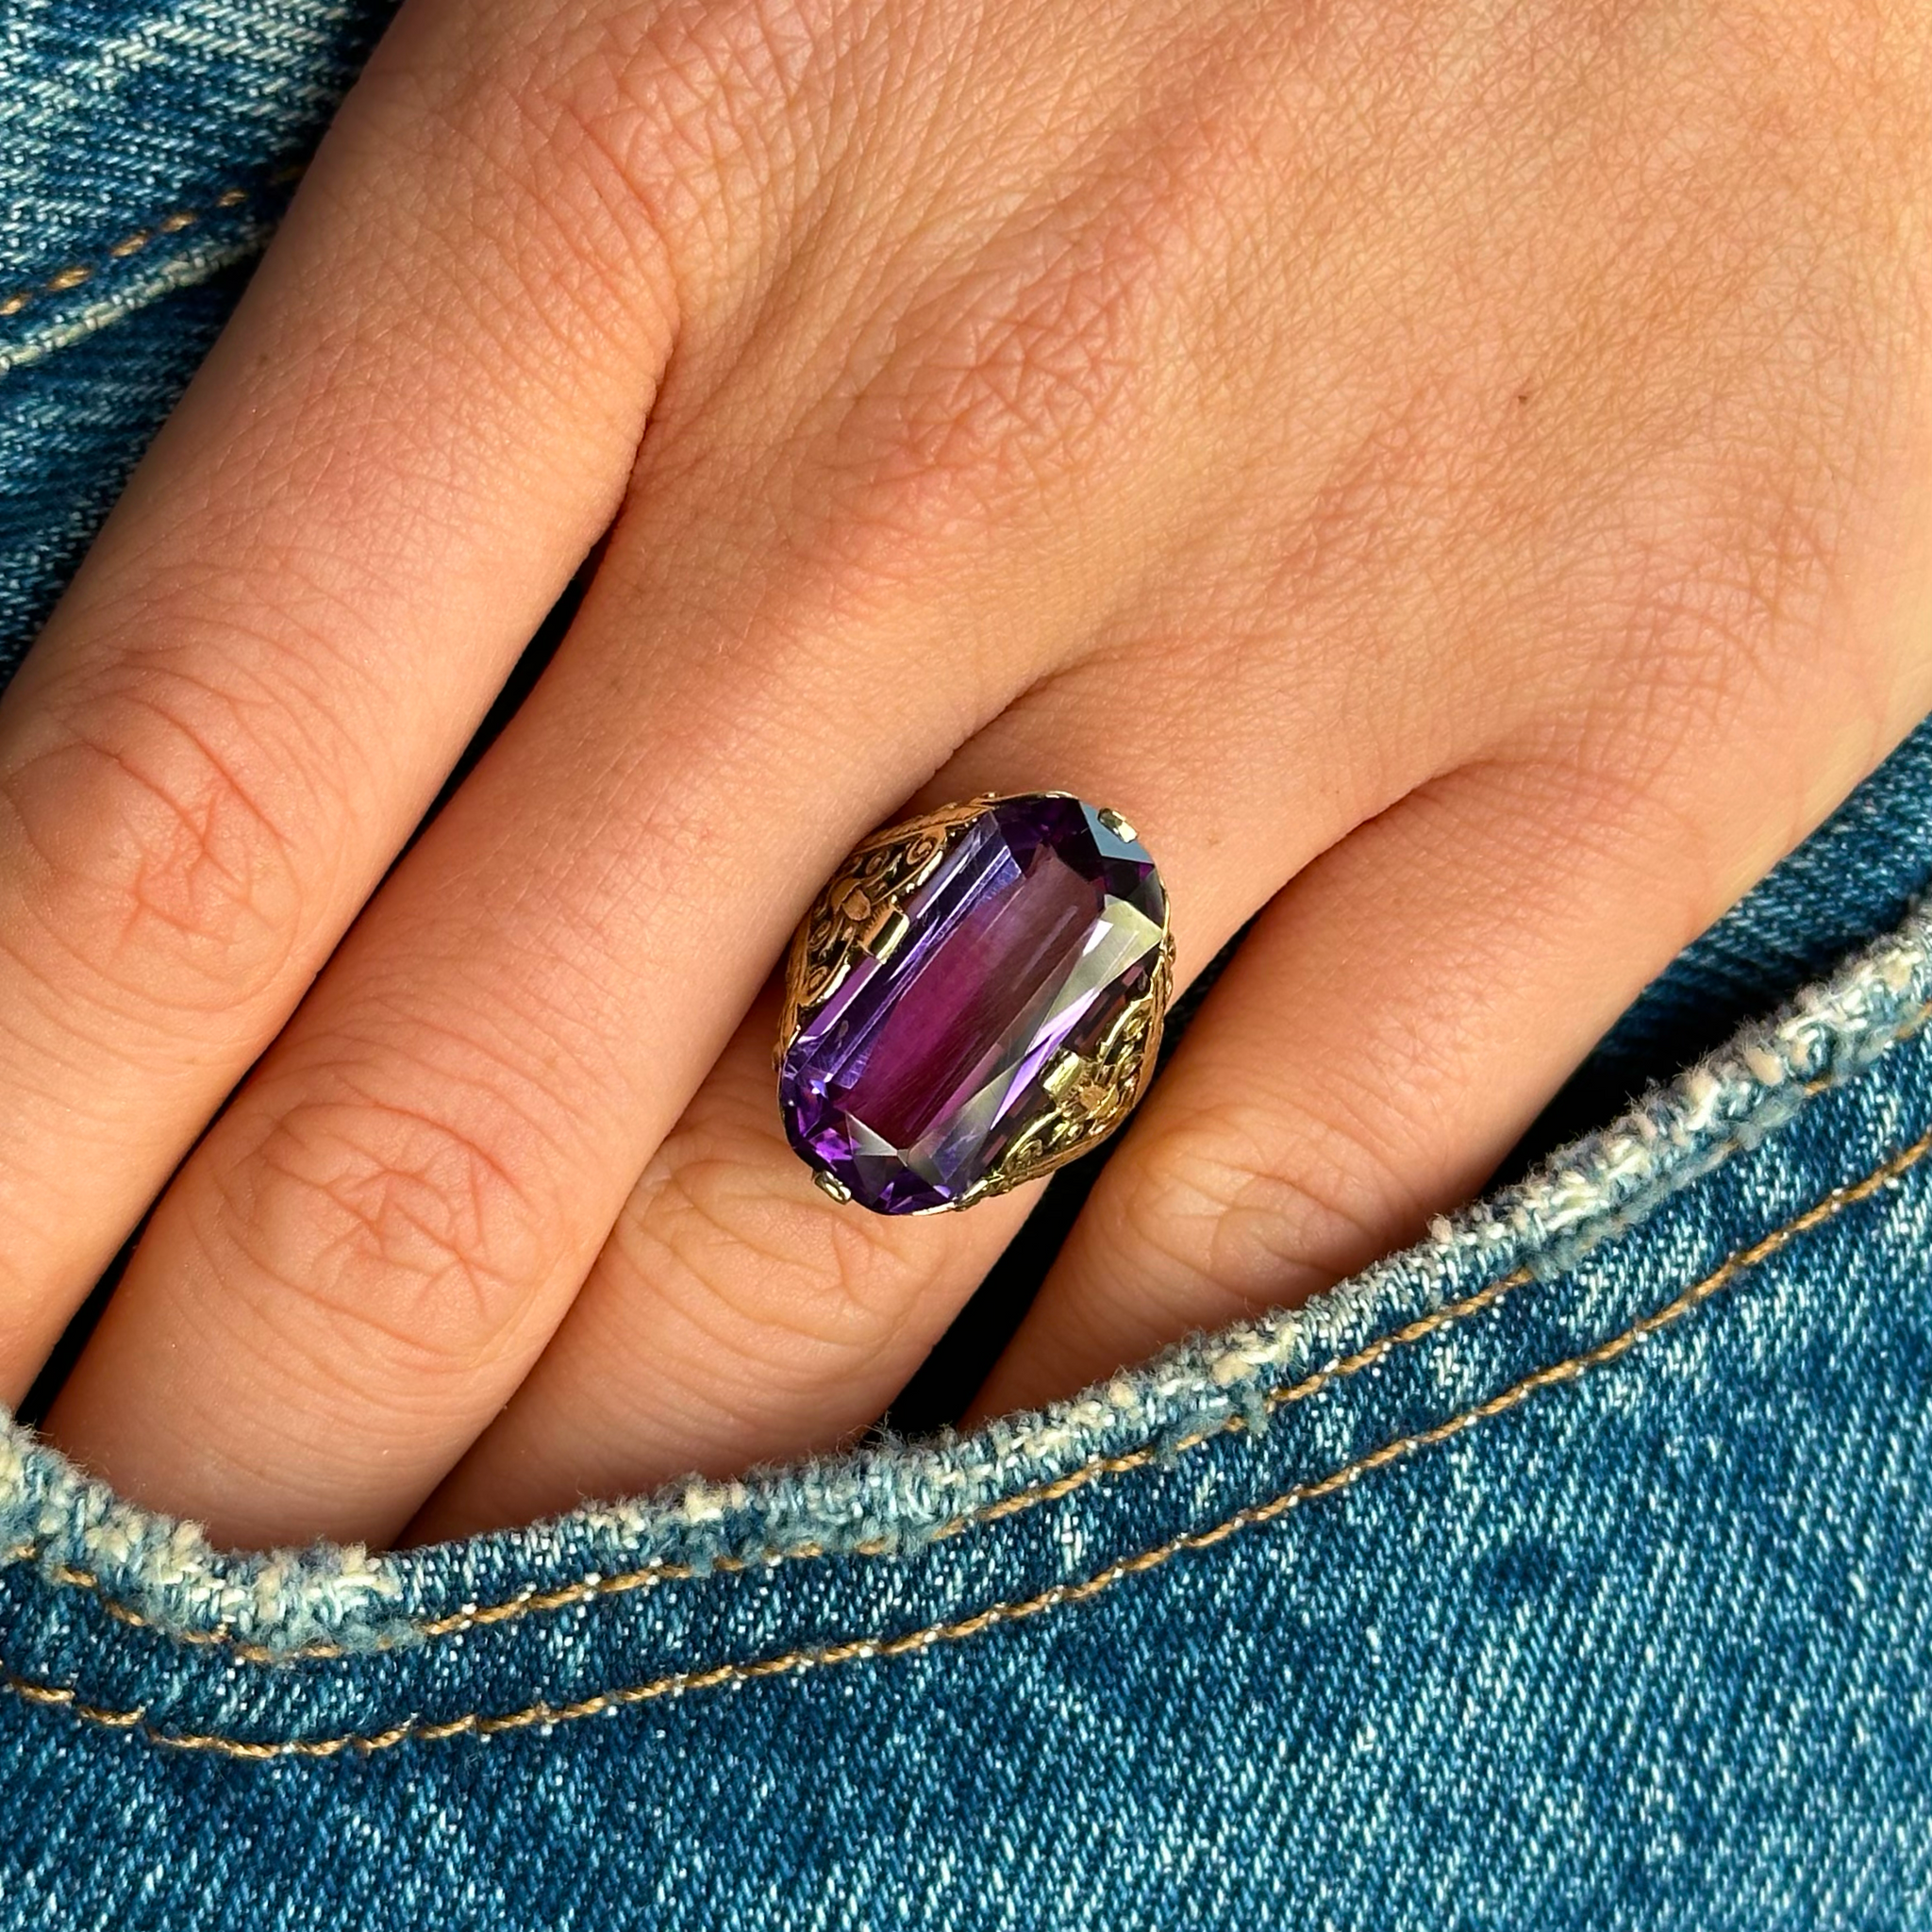 victorian amethyst and 14ct yellow gold ring worn on hand in pocket of jeans